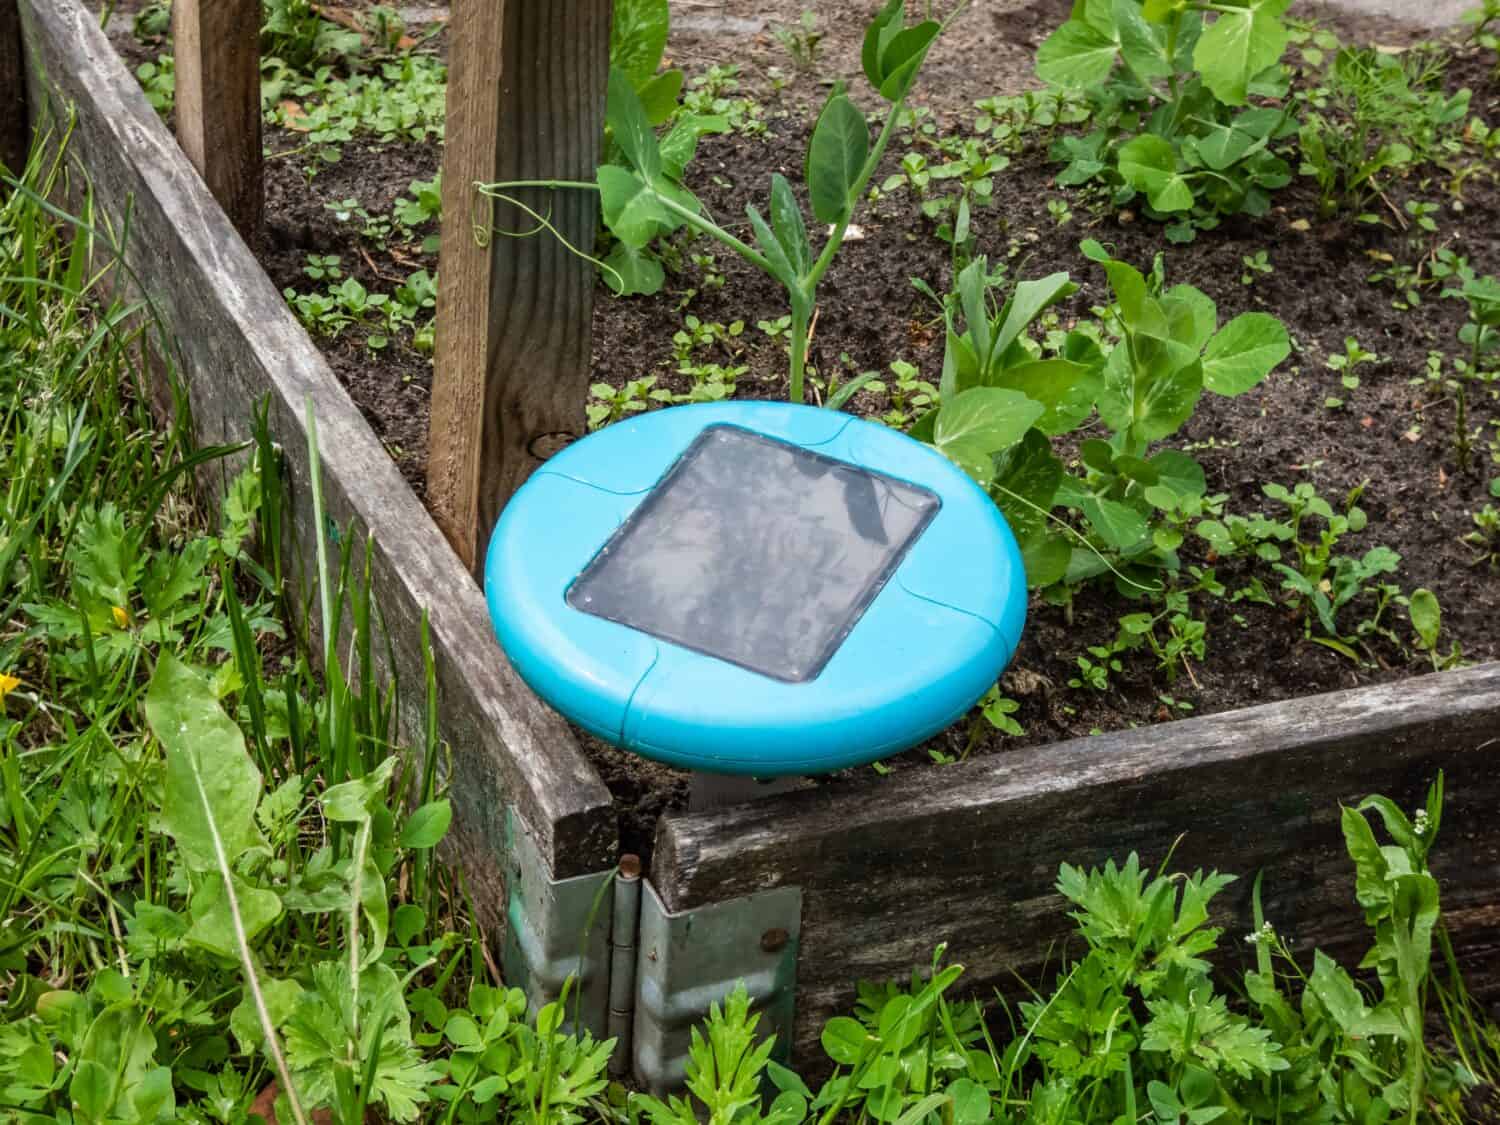 Ultrasonic, solar-powered mole repellent or repeller device in the soil in a vegetable bed with small green pea sprouts in bacground. Device with beeping keep out pests